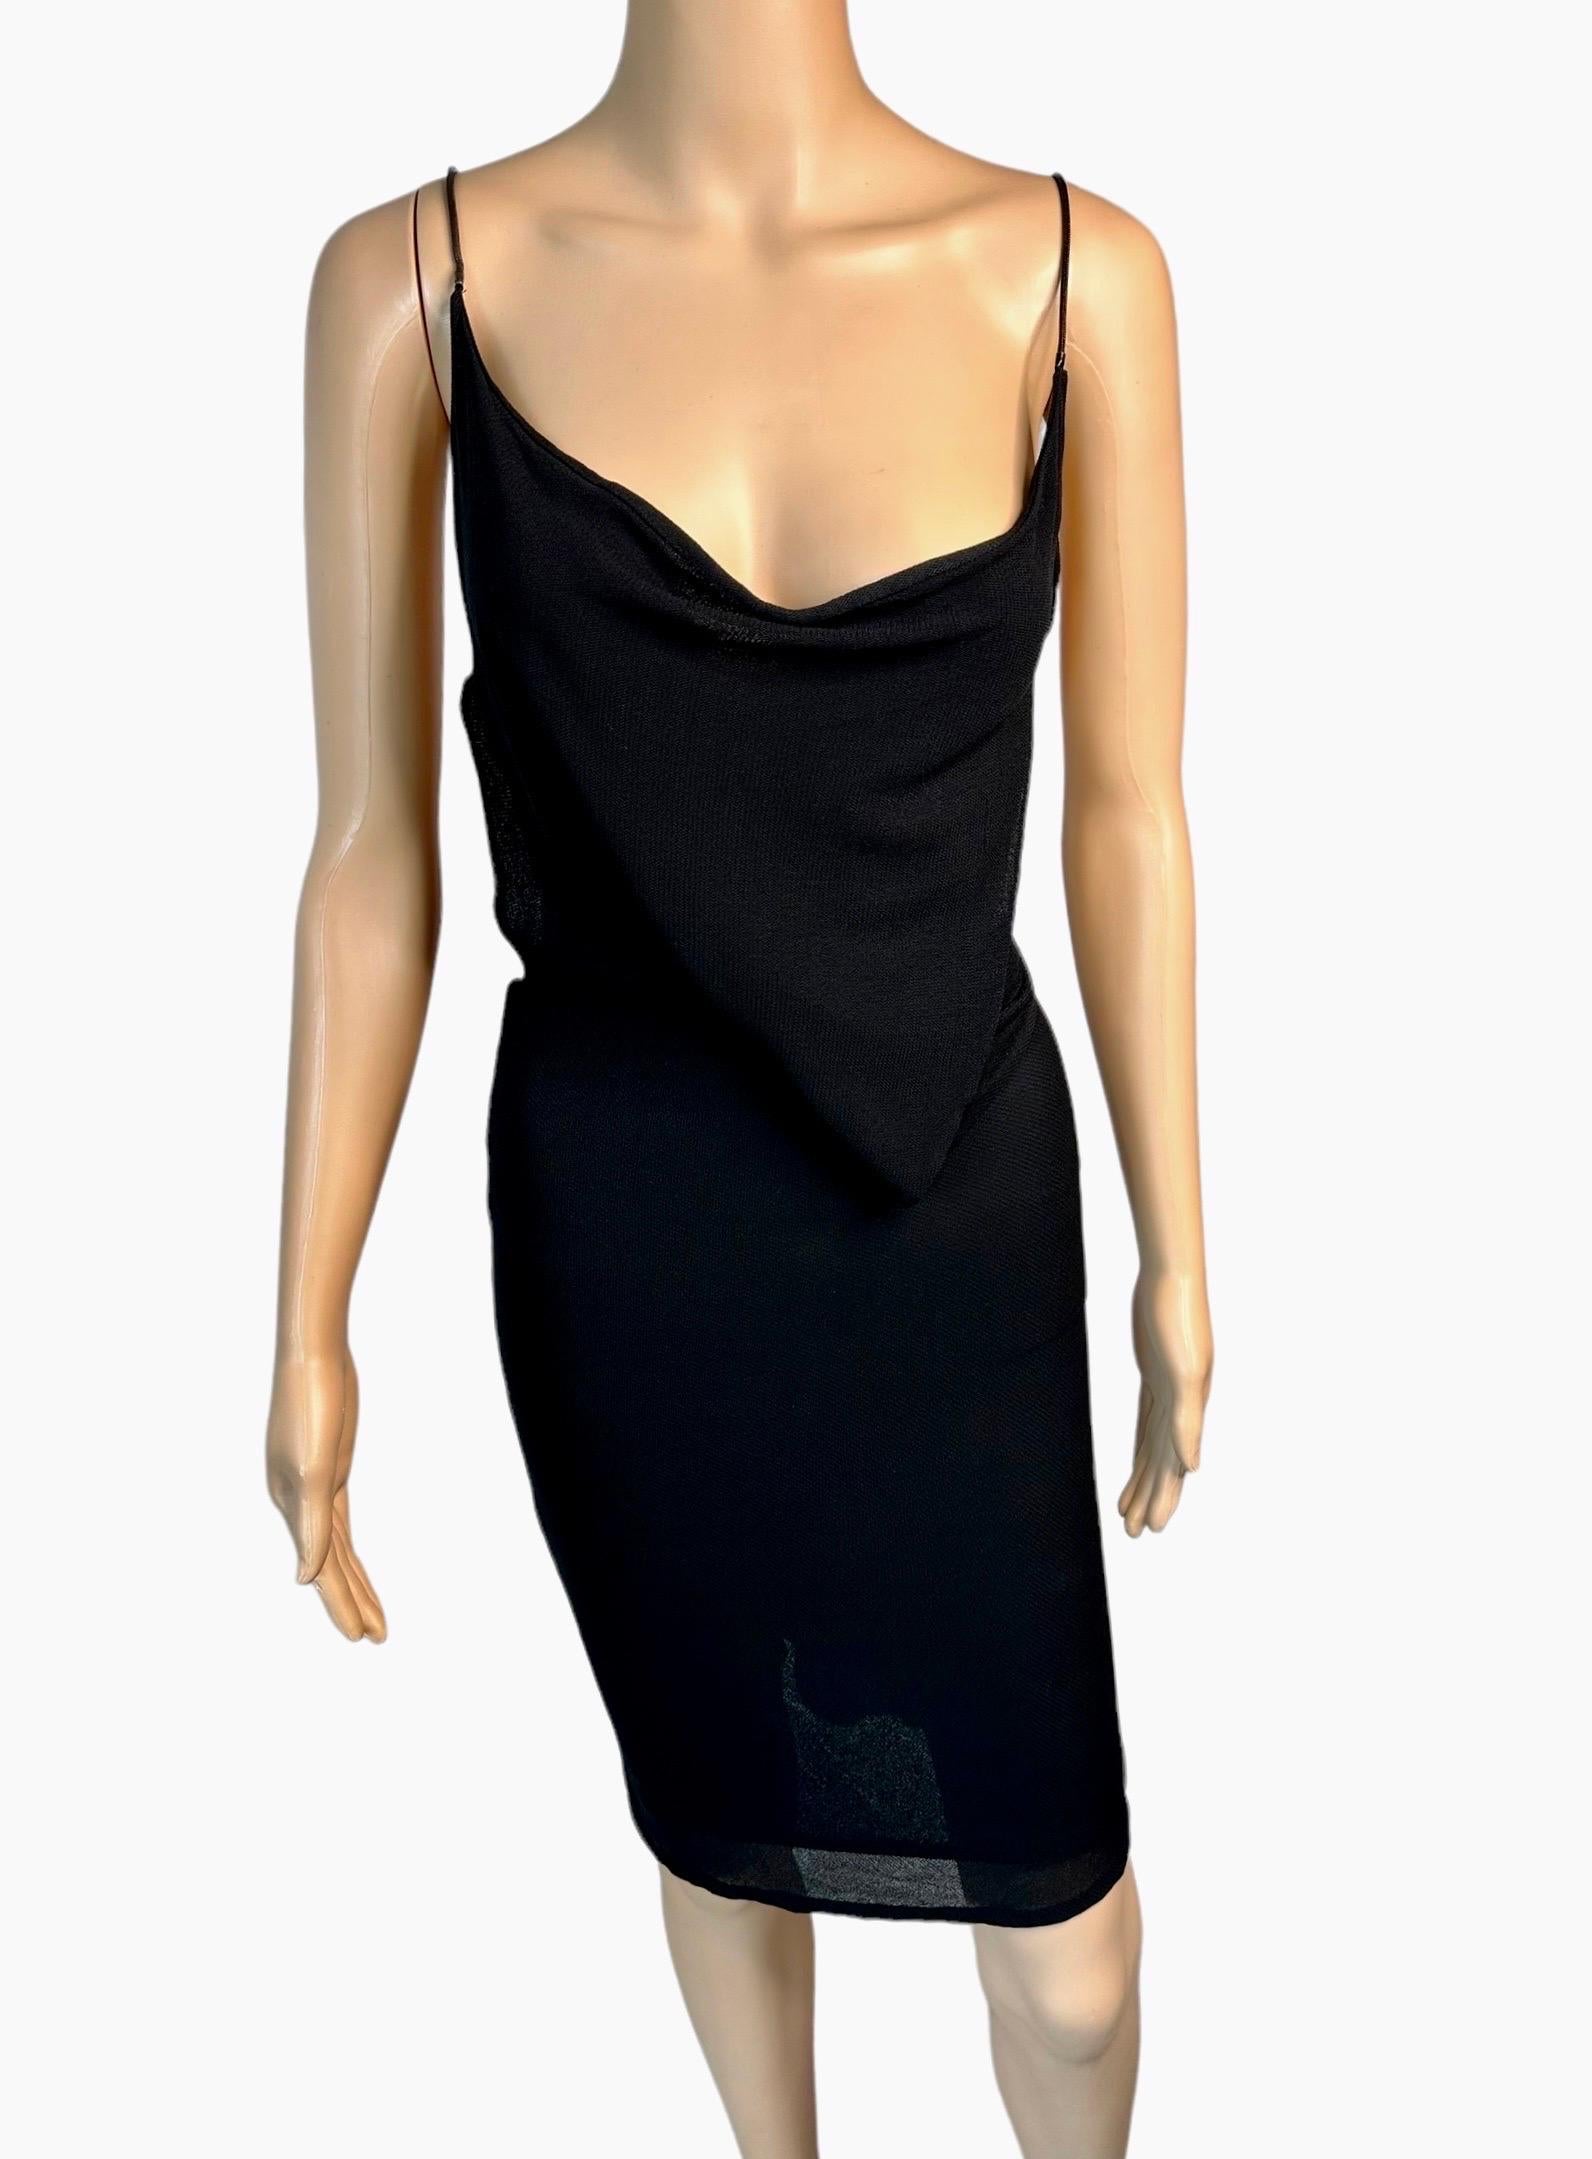 Women's Tom Ford for Gucci S/S 1997 Runway Chain Cutout Backless Sheer Knit Black Dress For Sale